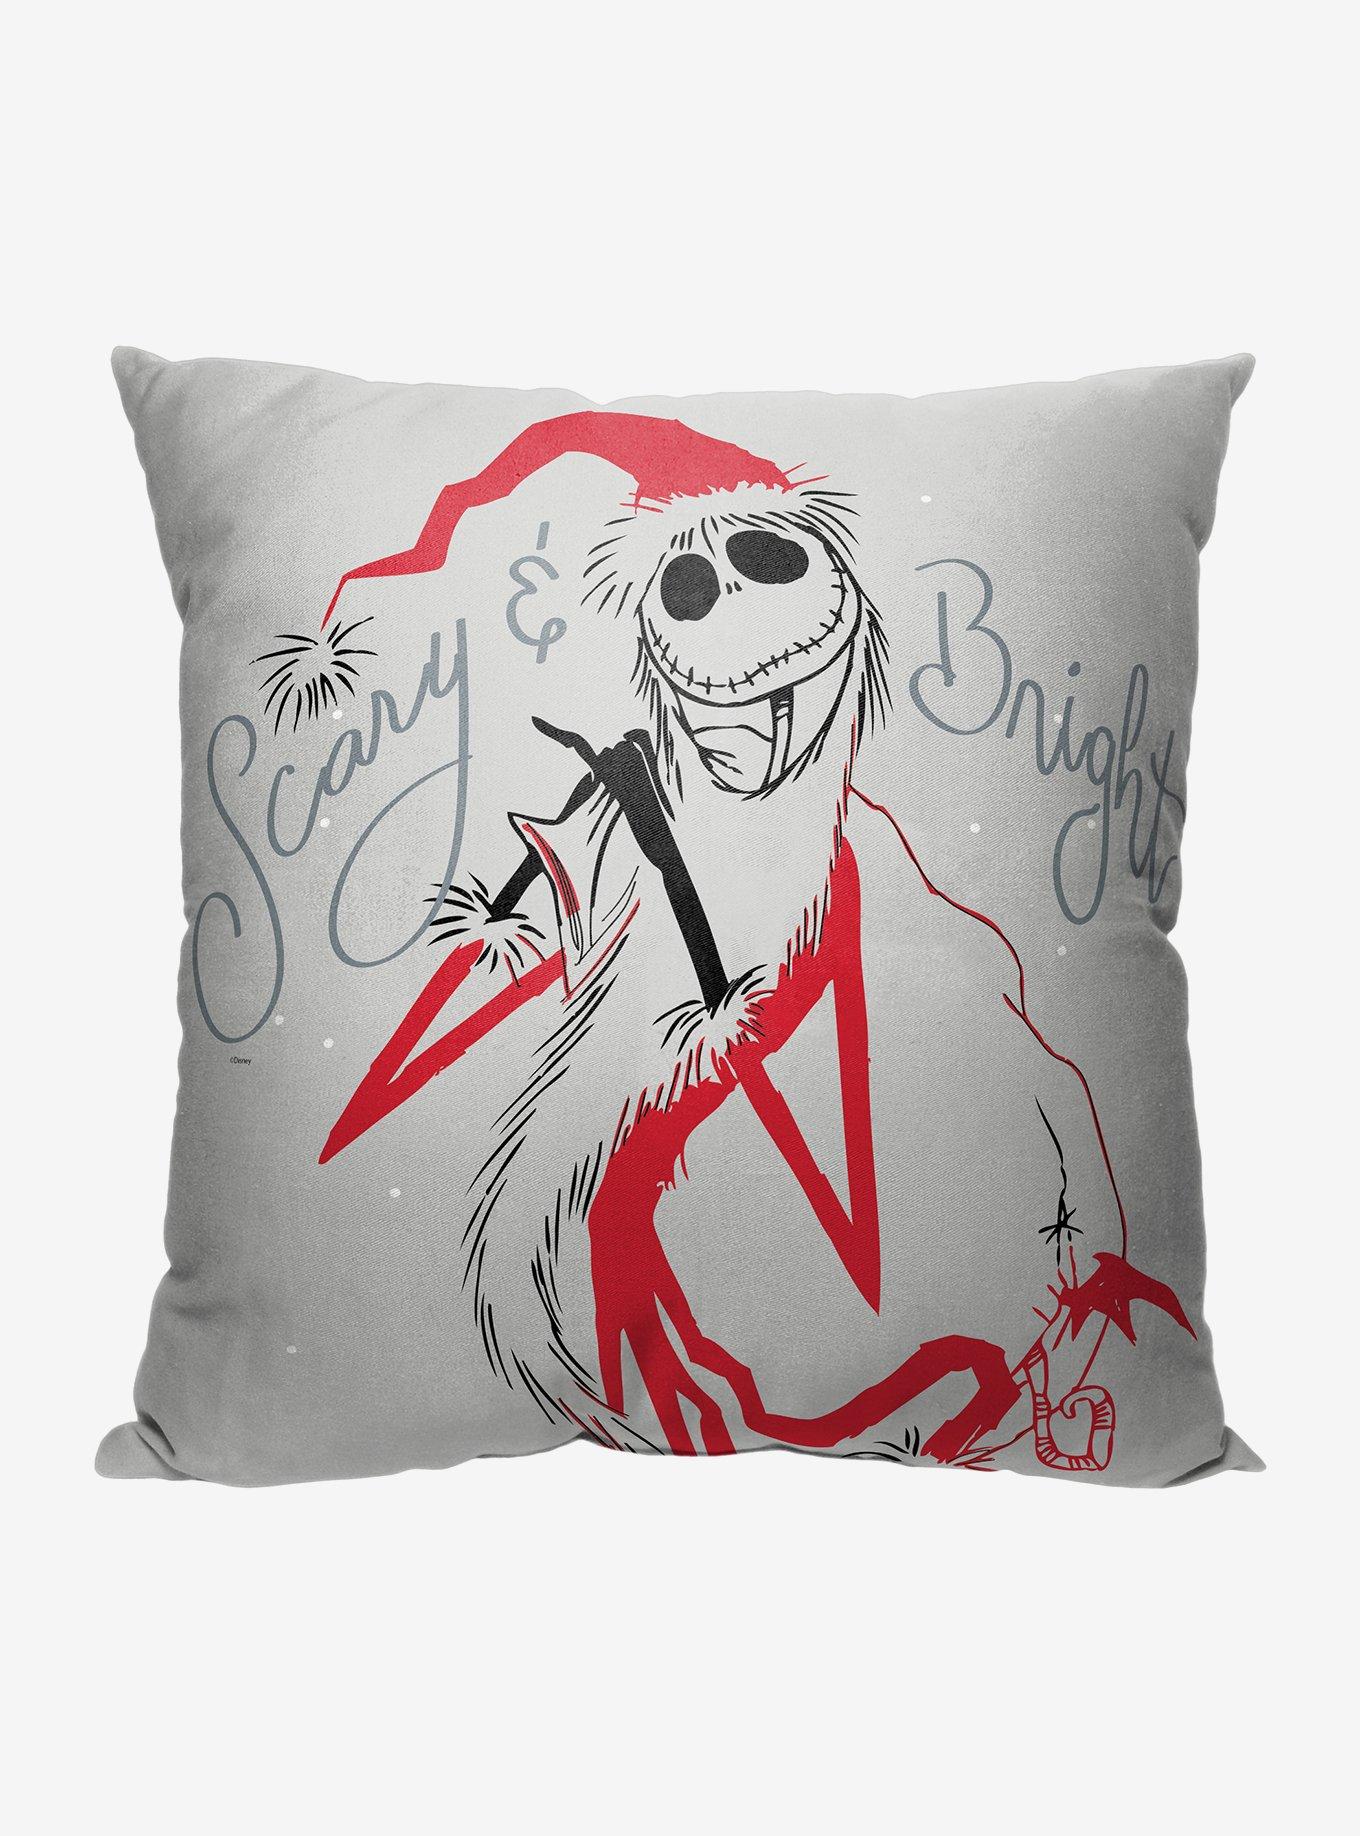 The Grim Boat-Gothic lovers Throw Pillow